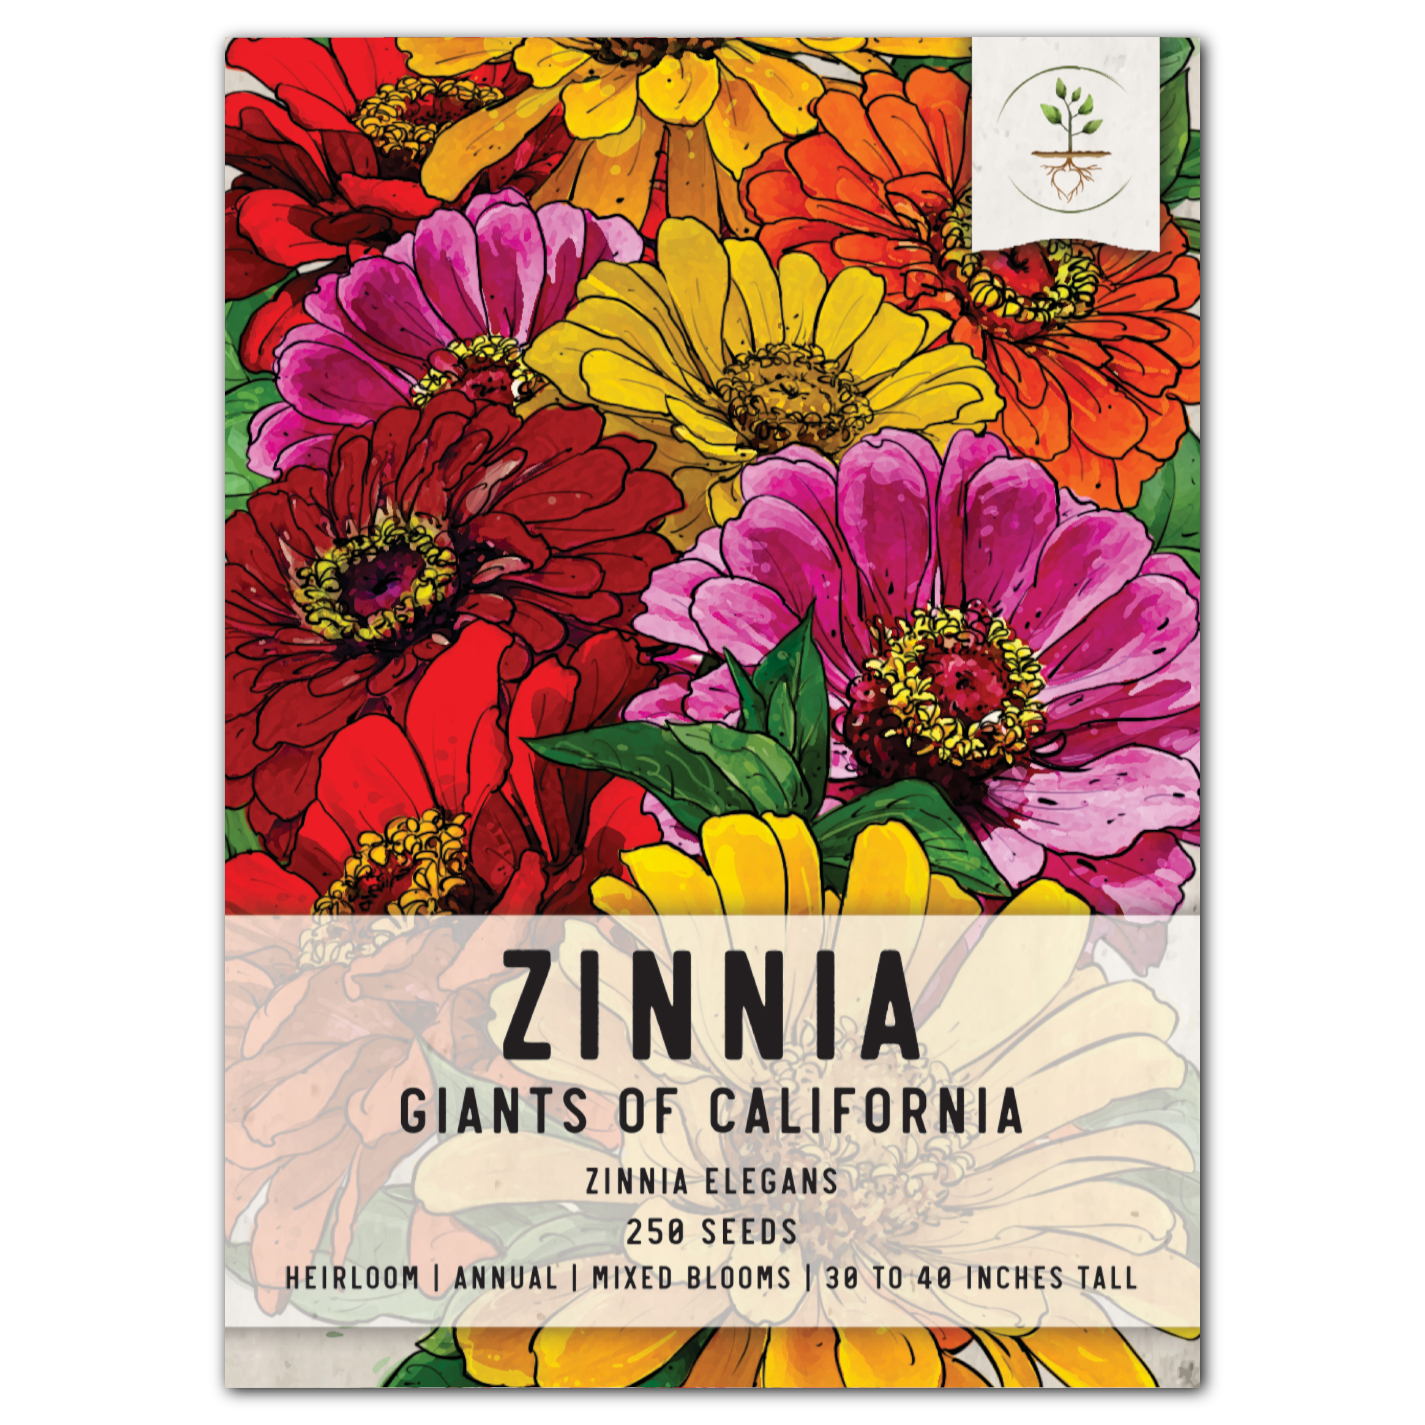 giants of california zinnia seeds for planting